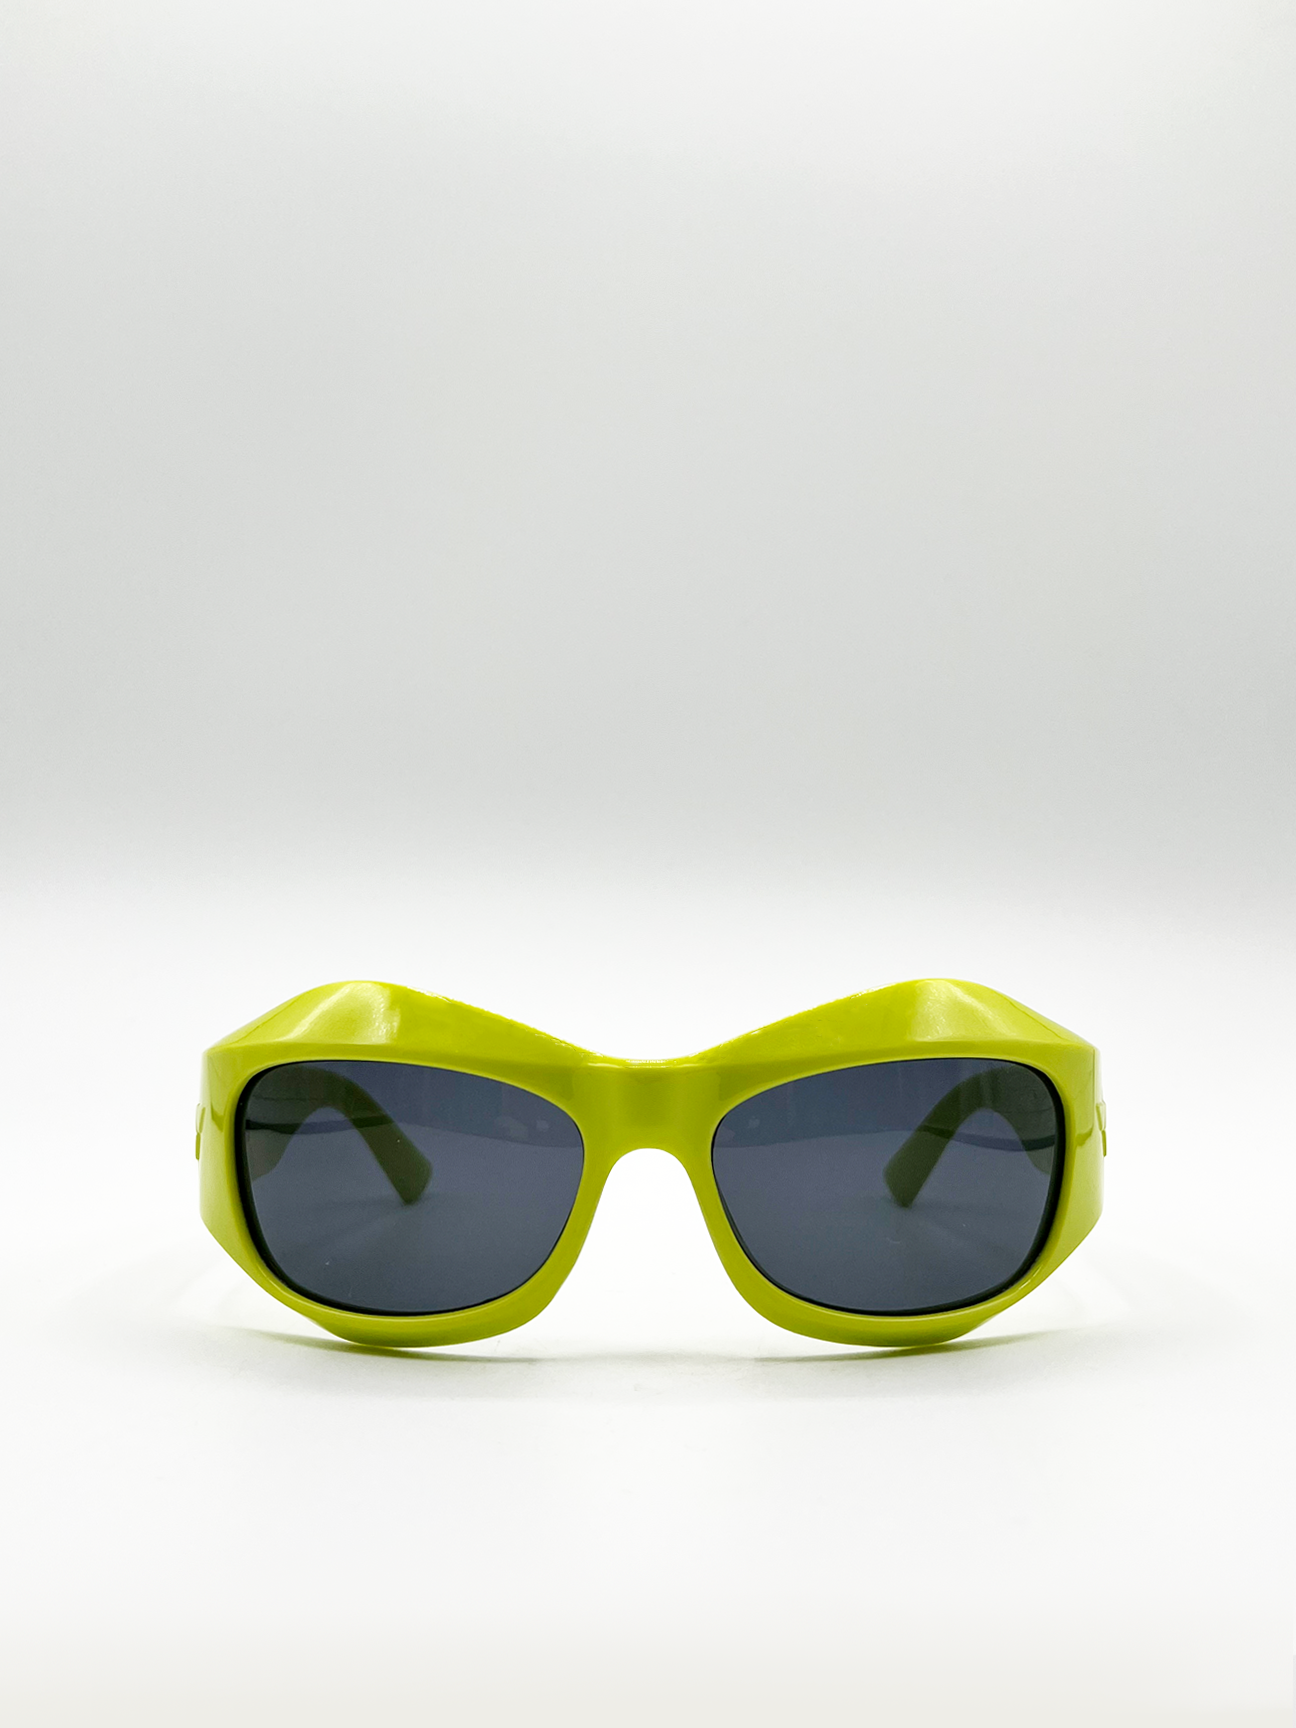 Green Exaggerated Brow Racer Style Sunglasses with Black Lenses